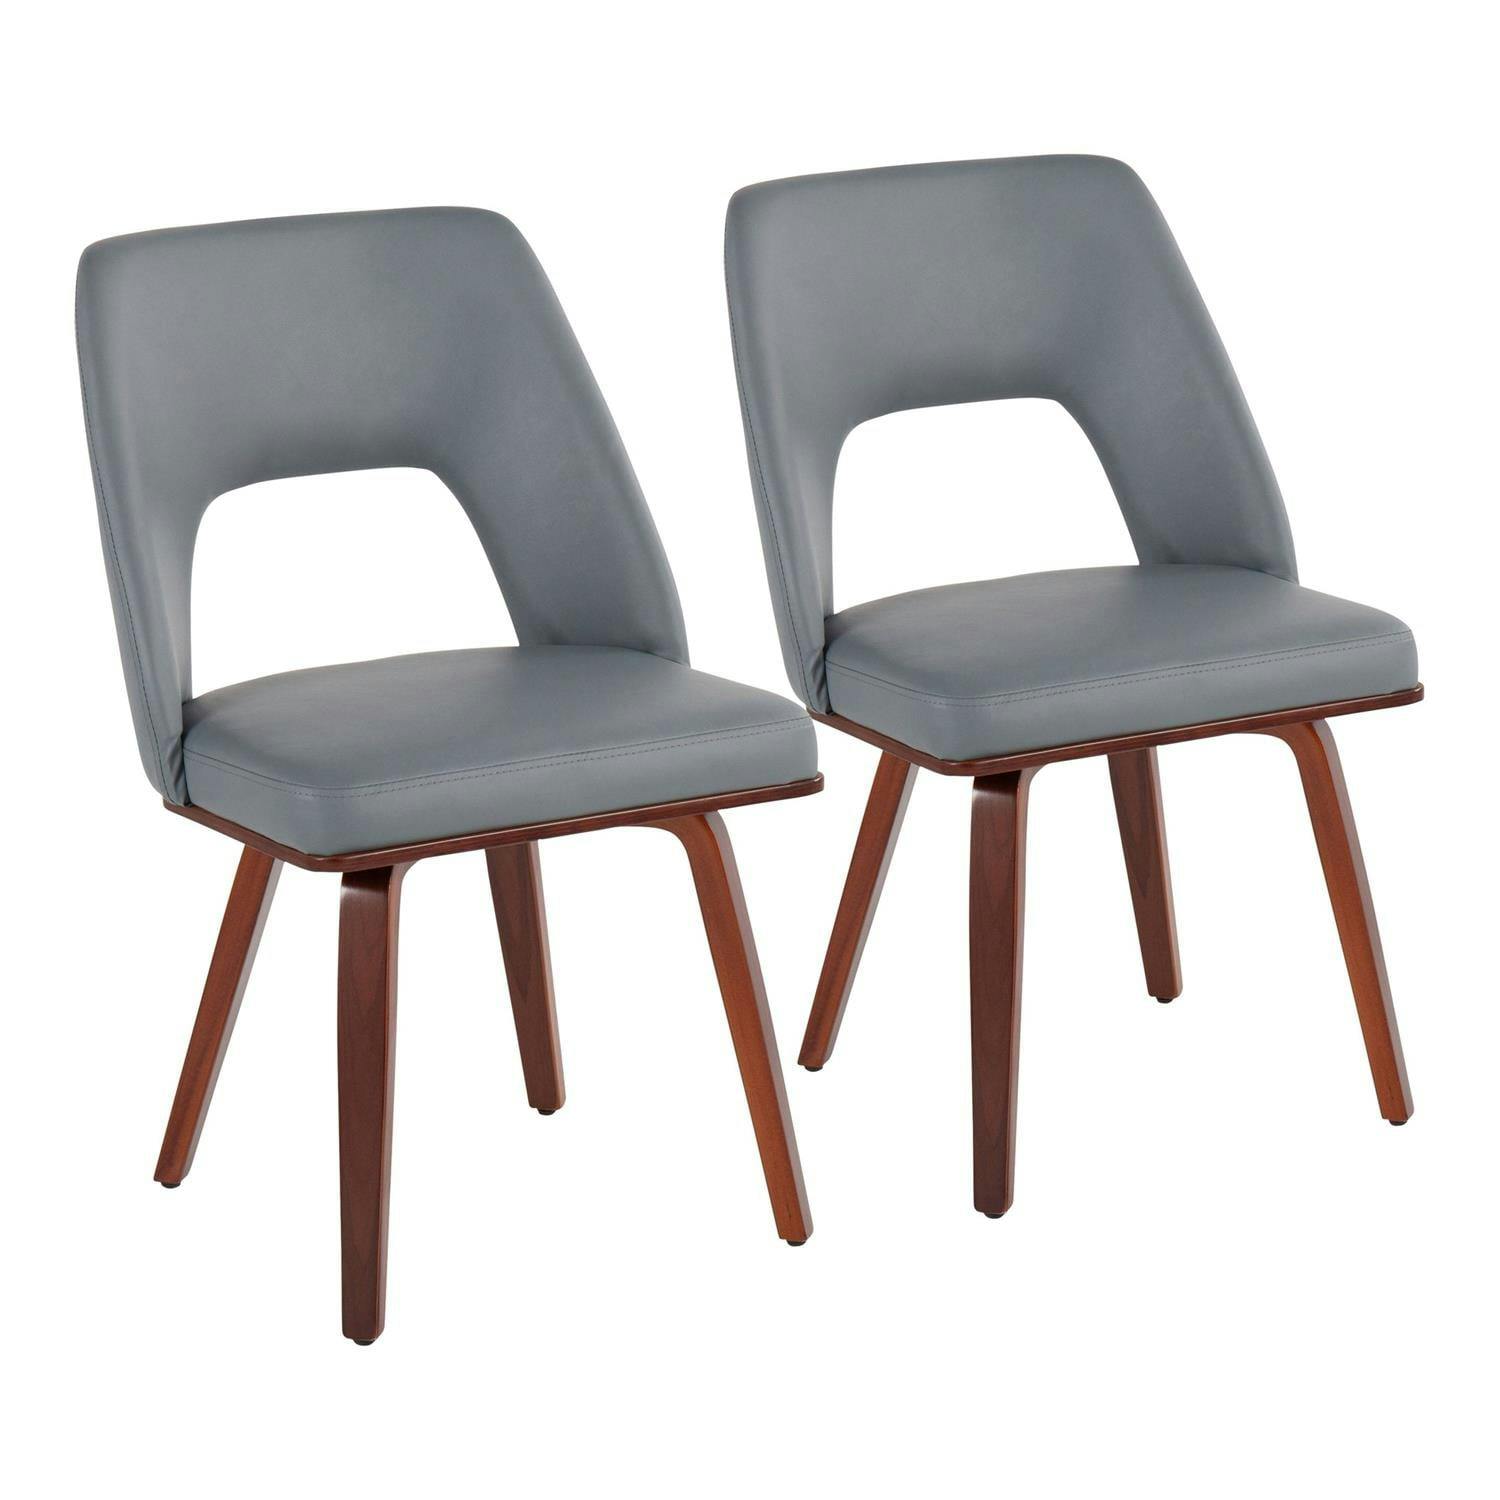 Triad Walnut Bamboo and Grey Faux Leather Dining Chairs, Set of 2